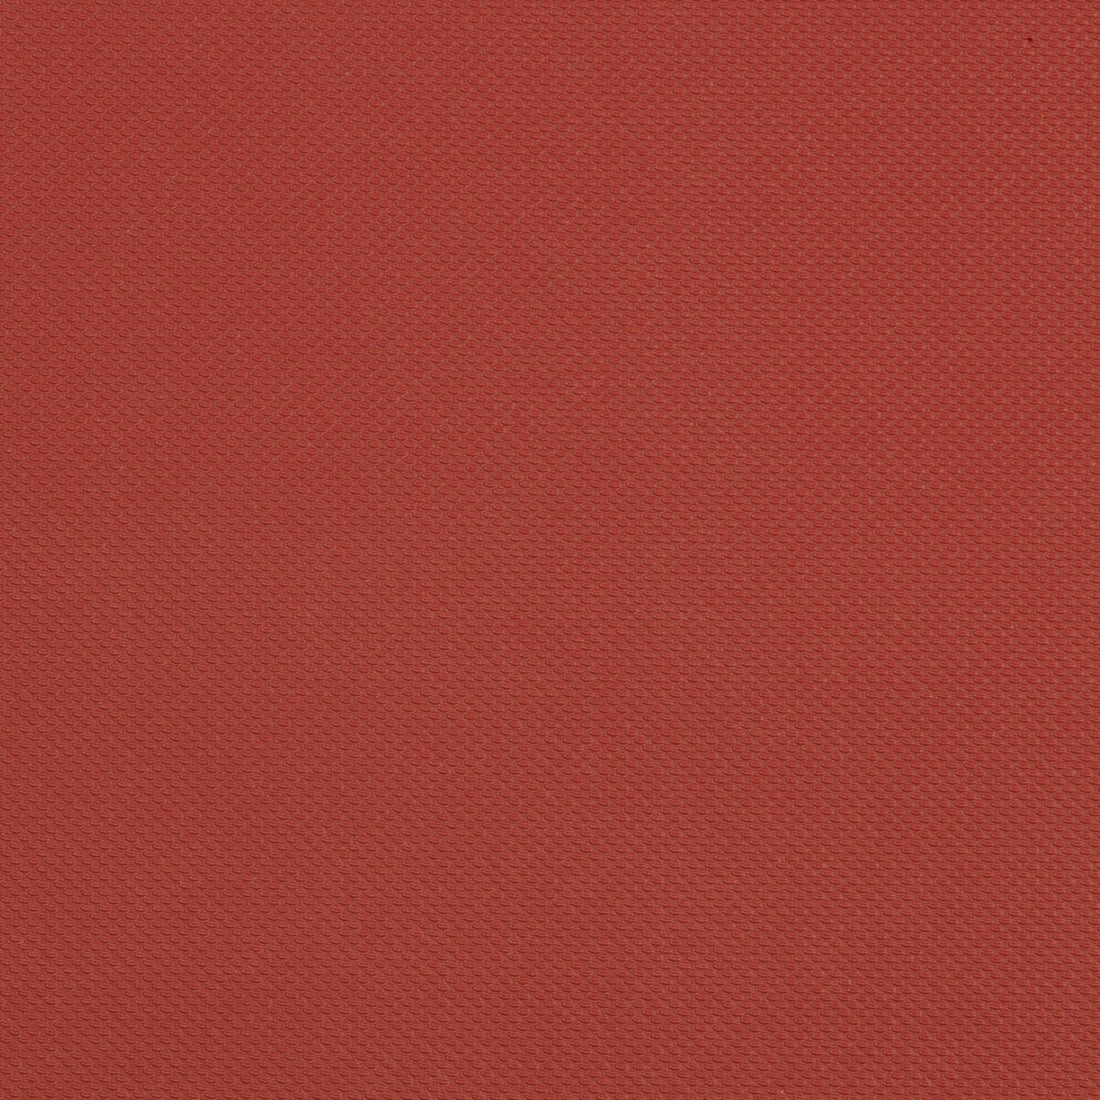 Iron Man fabric in cherry color - pattern IRON MAN.19.0 - by Kravet Contract in the Faux Leather Extreme Performance collection